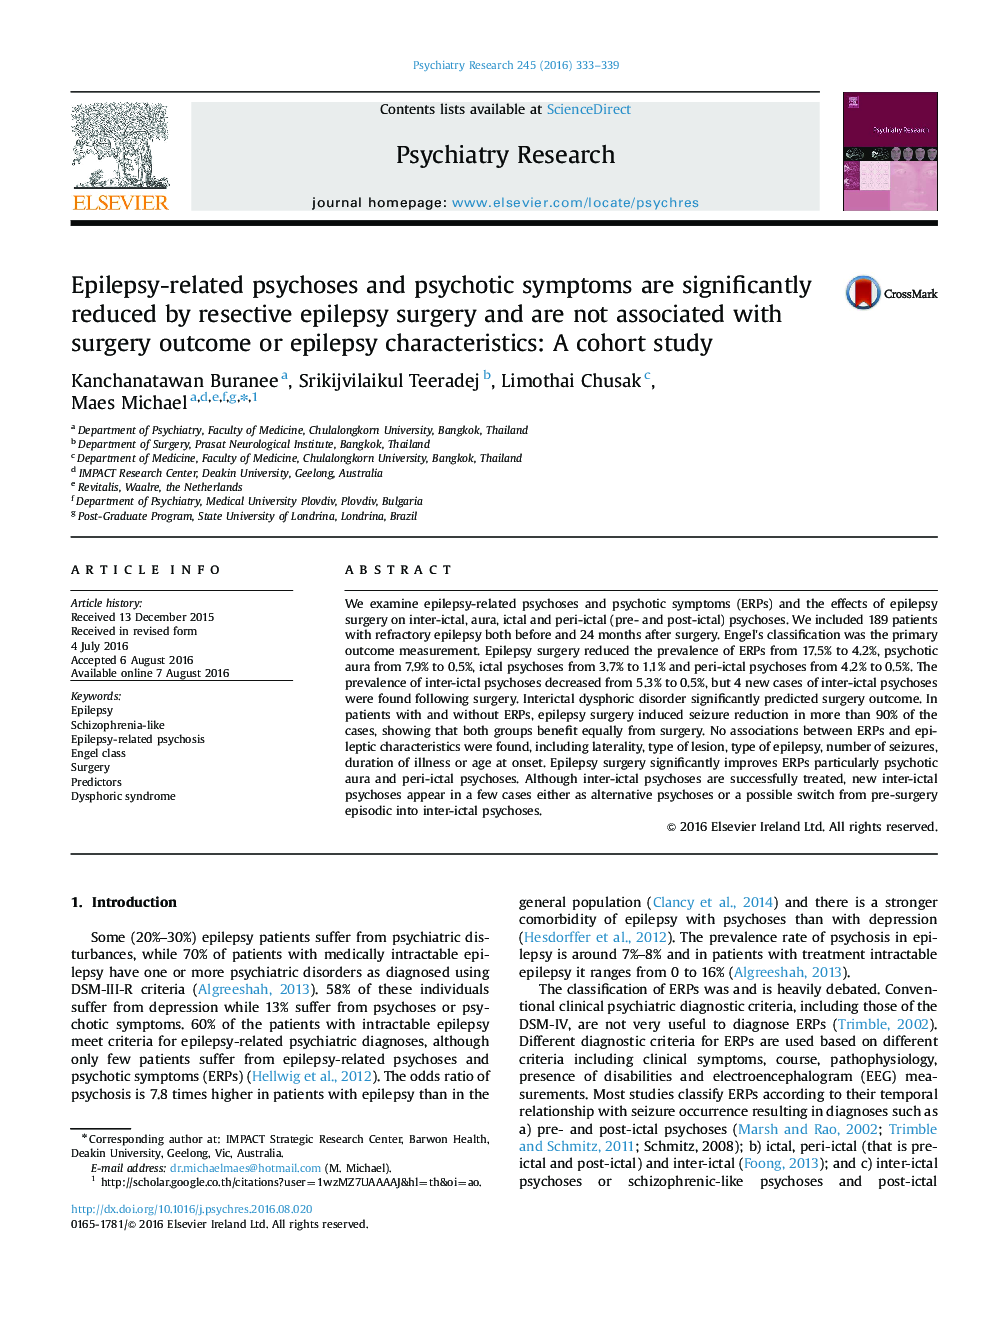 Epilepsy-related psychoses and psychotic symptoms are significantly reduced by resective epilepsy surgery and are not associated with surgery outcome or epilepsy characteristics: A cohort study